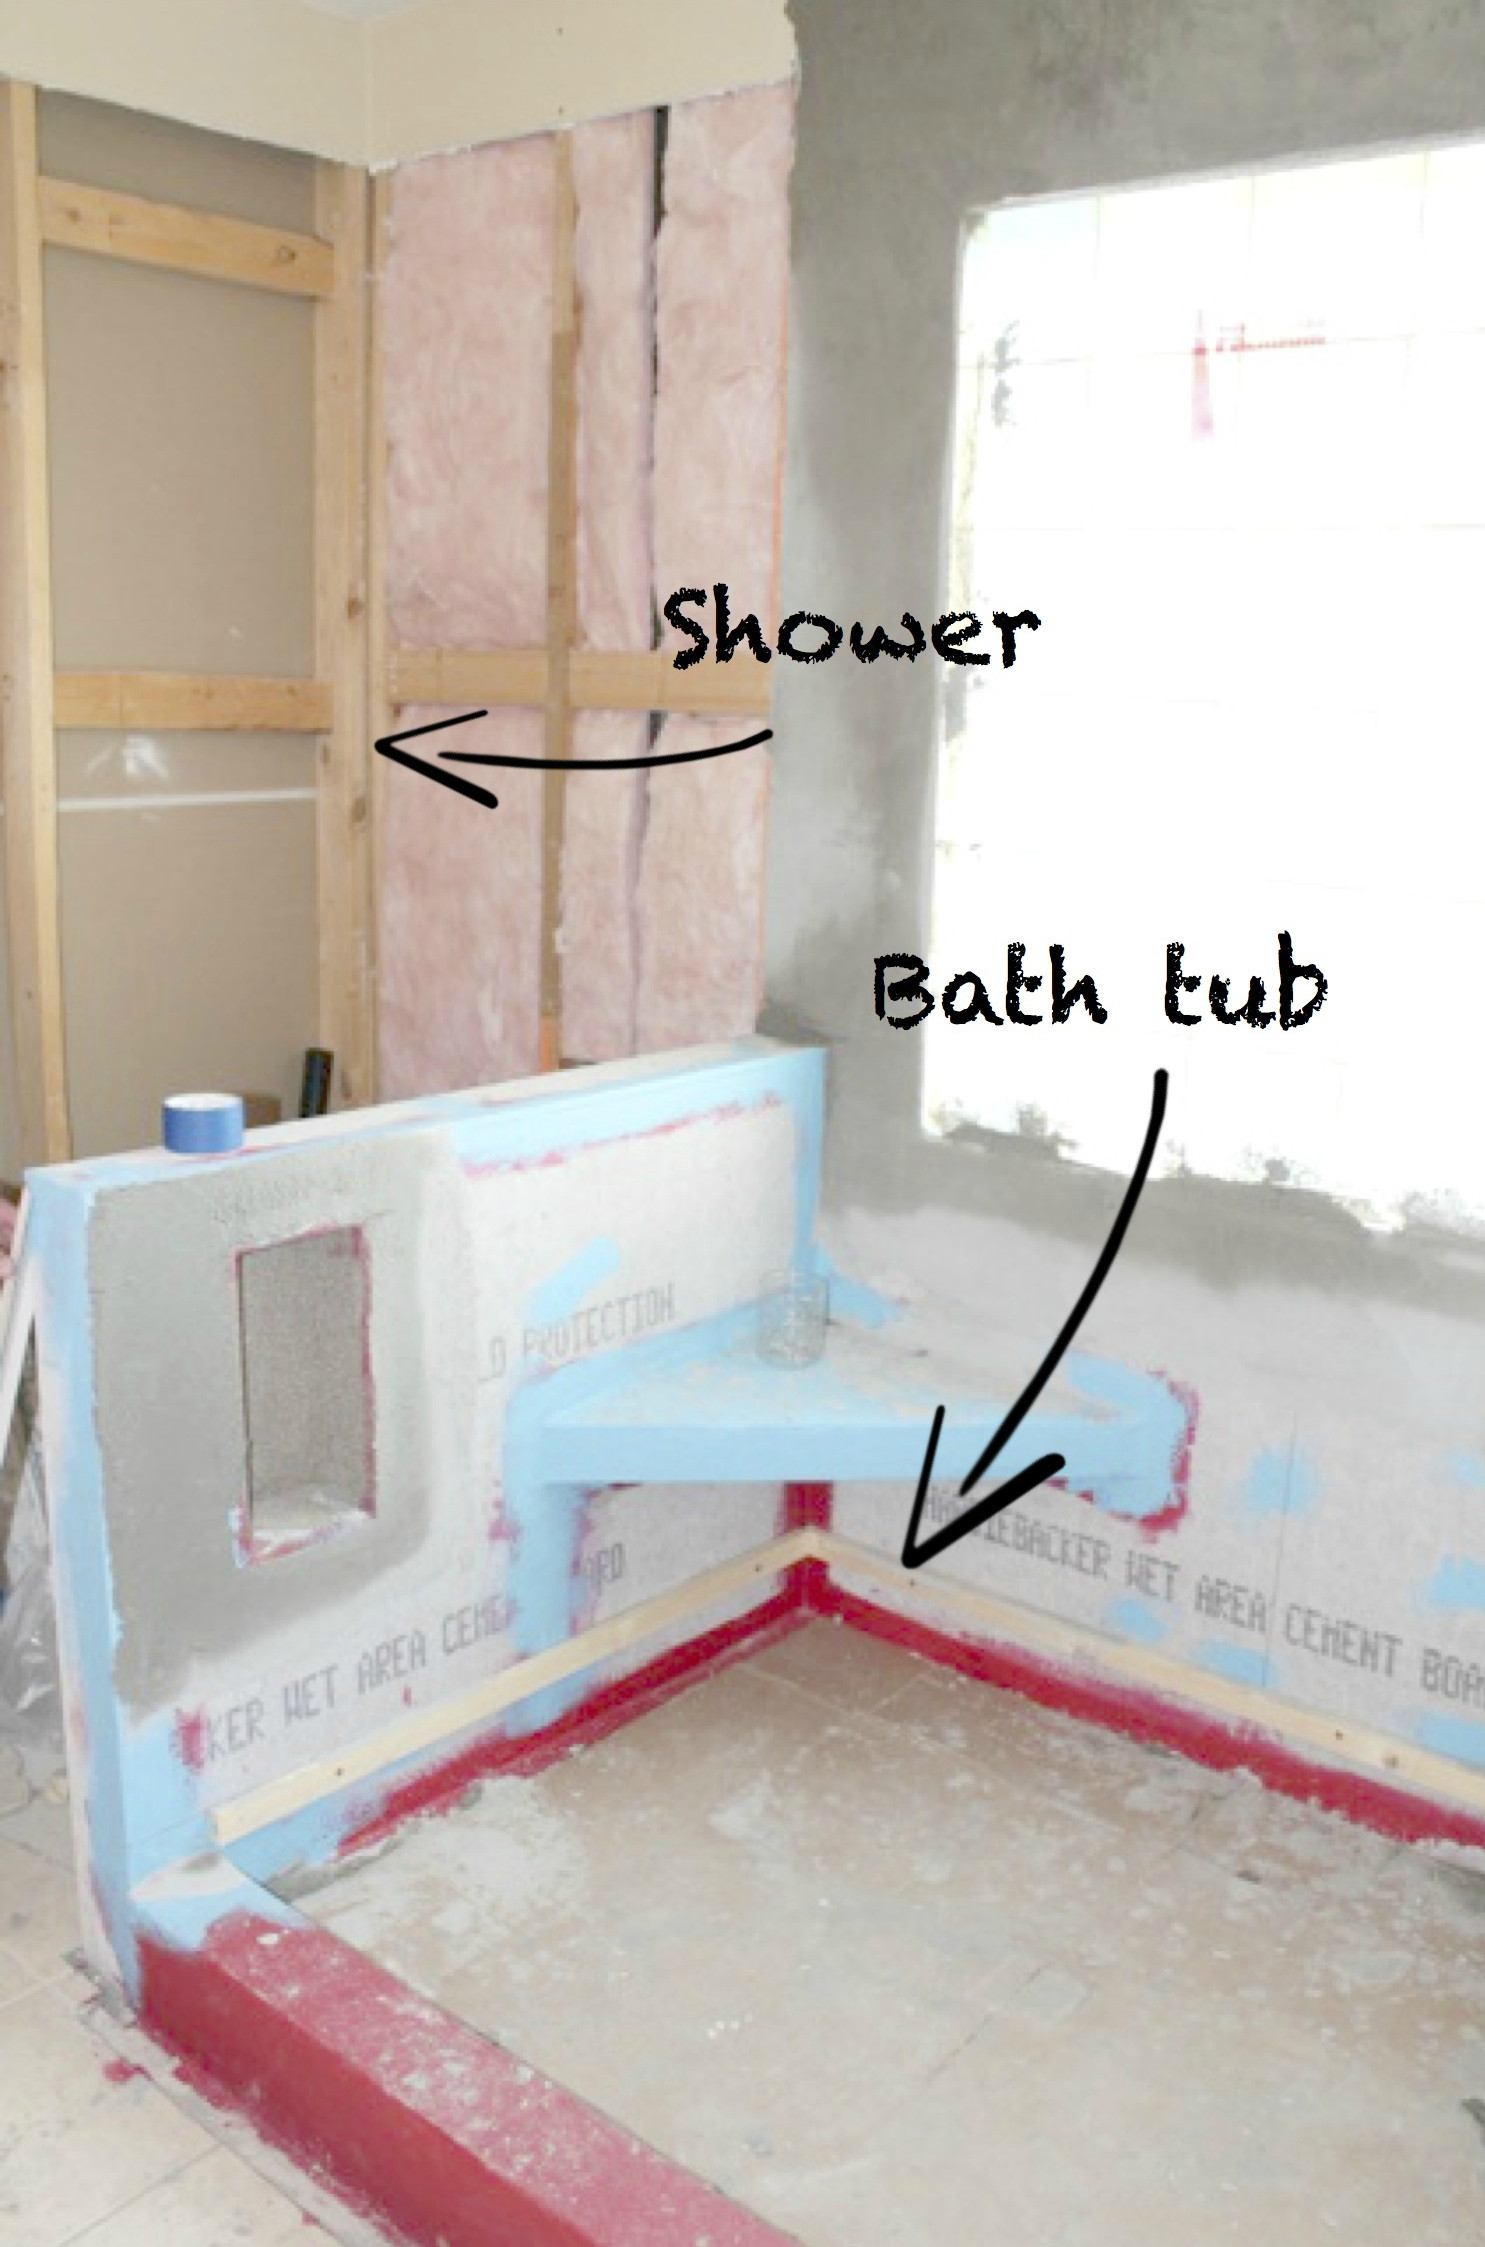 Master Bathroom Without Tub
 Master Bathroom Remodel Without Tub